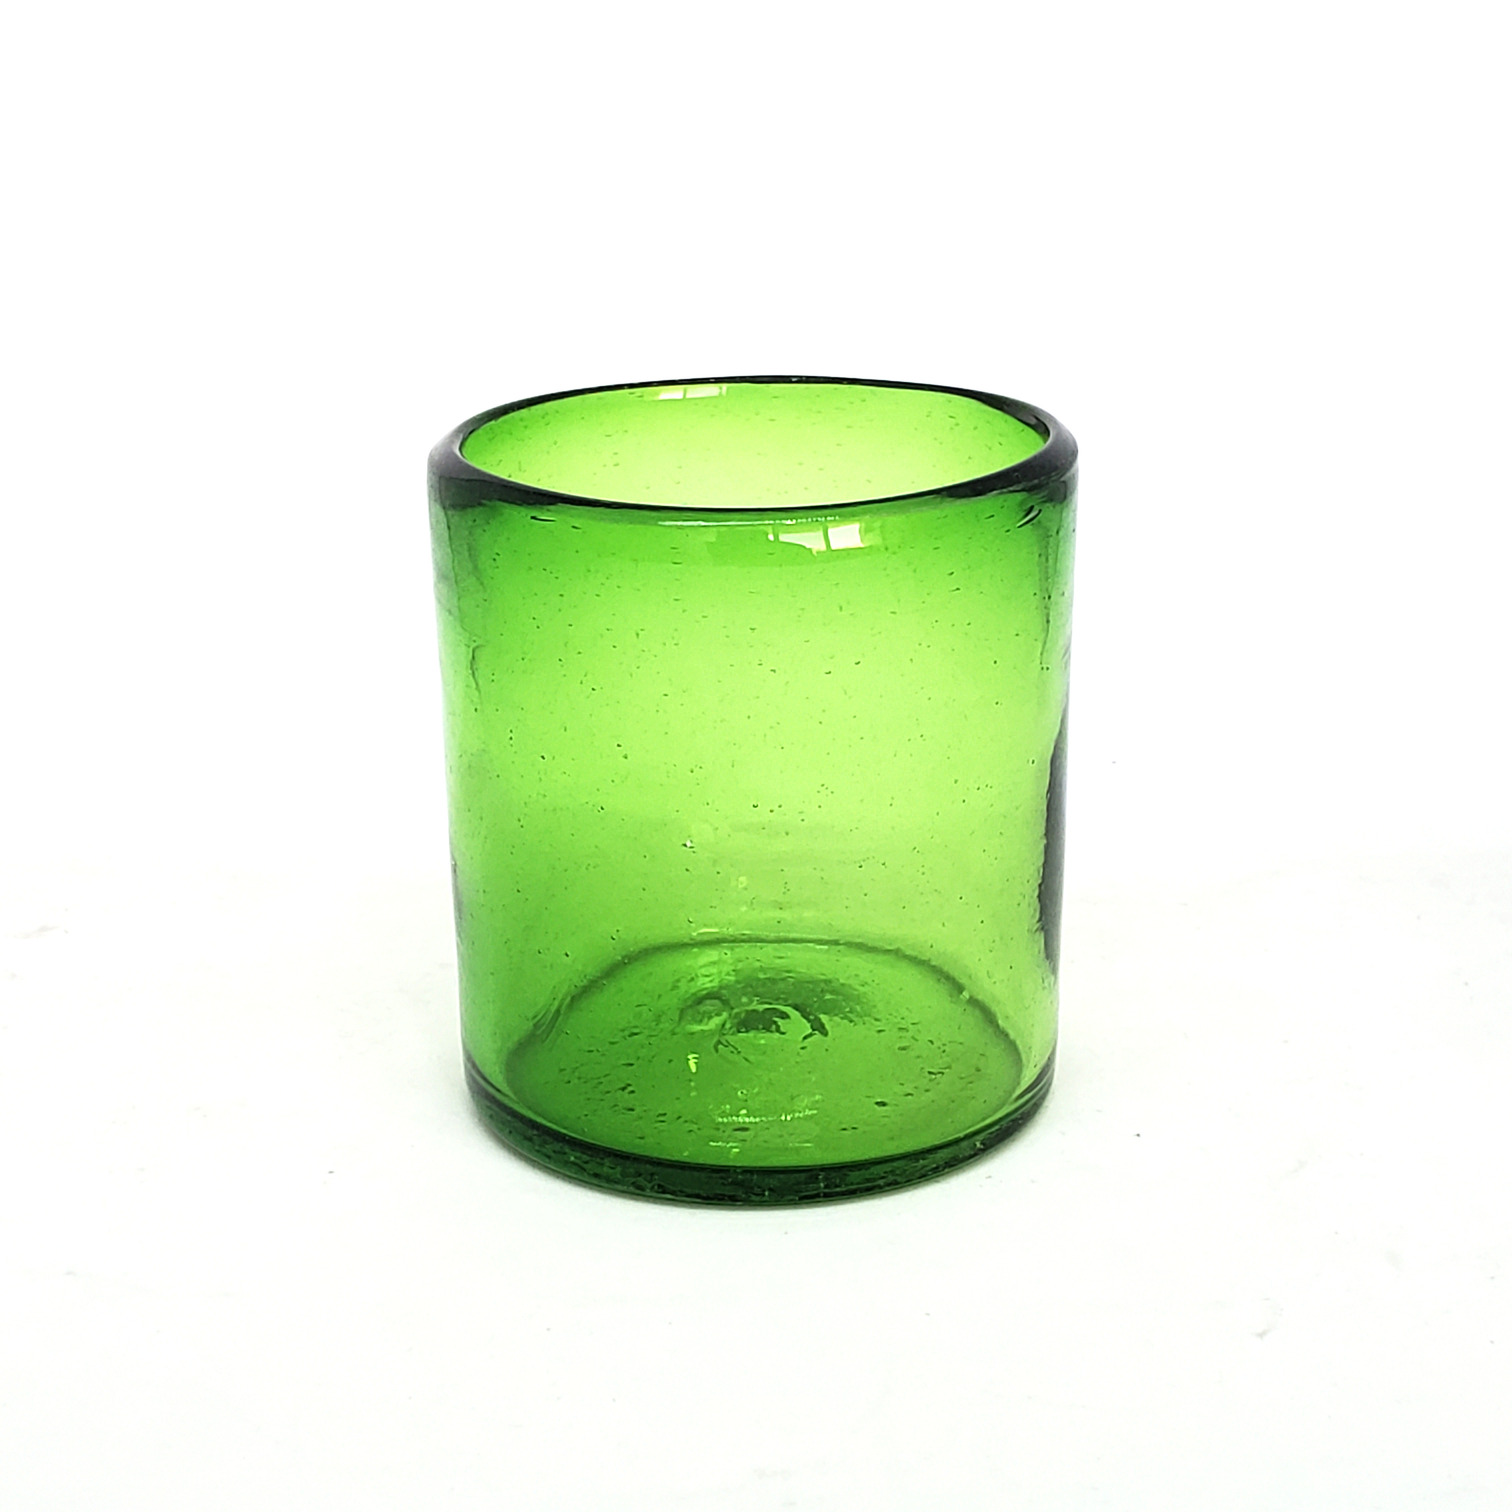 Wholesale Colored Glassware / Solid Emerald Green 9 oz Short Tumblers  / Enhance your favorite drink with these colorful handcrafted glasses.